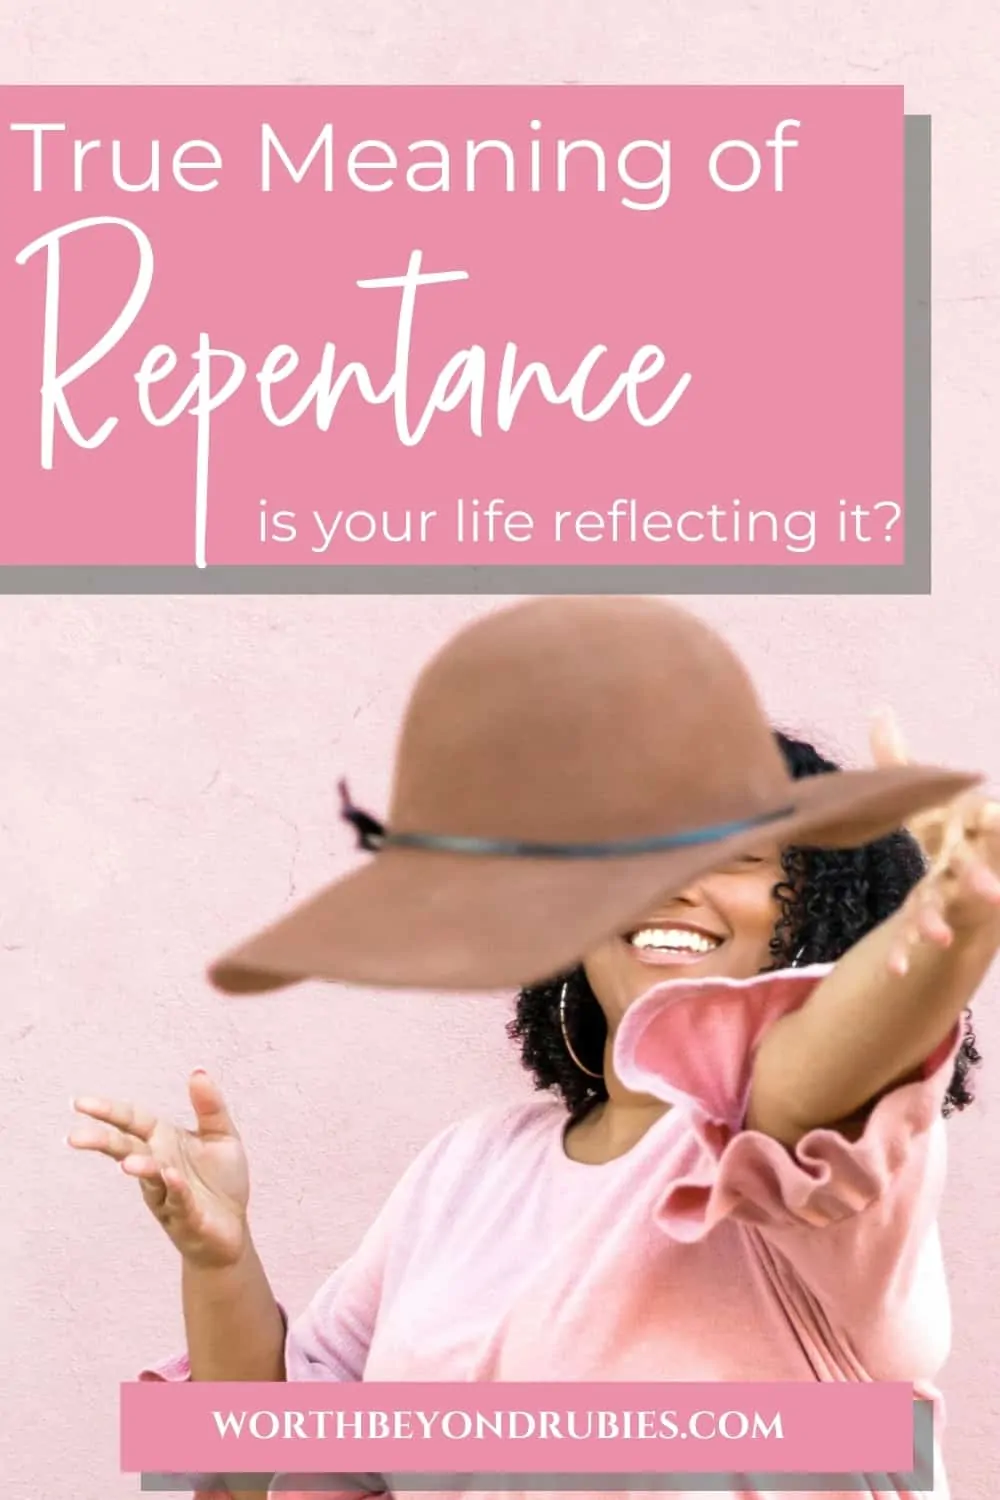 An image of a black woman dressed in pink against a pink background. She is smiling as she tosses a brown rimmed hat toward the camera. There is a text overlay that says True Meaning of Repentance - Is Your Life Reflecting It?